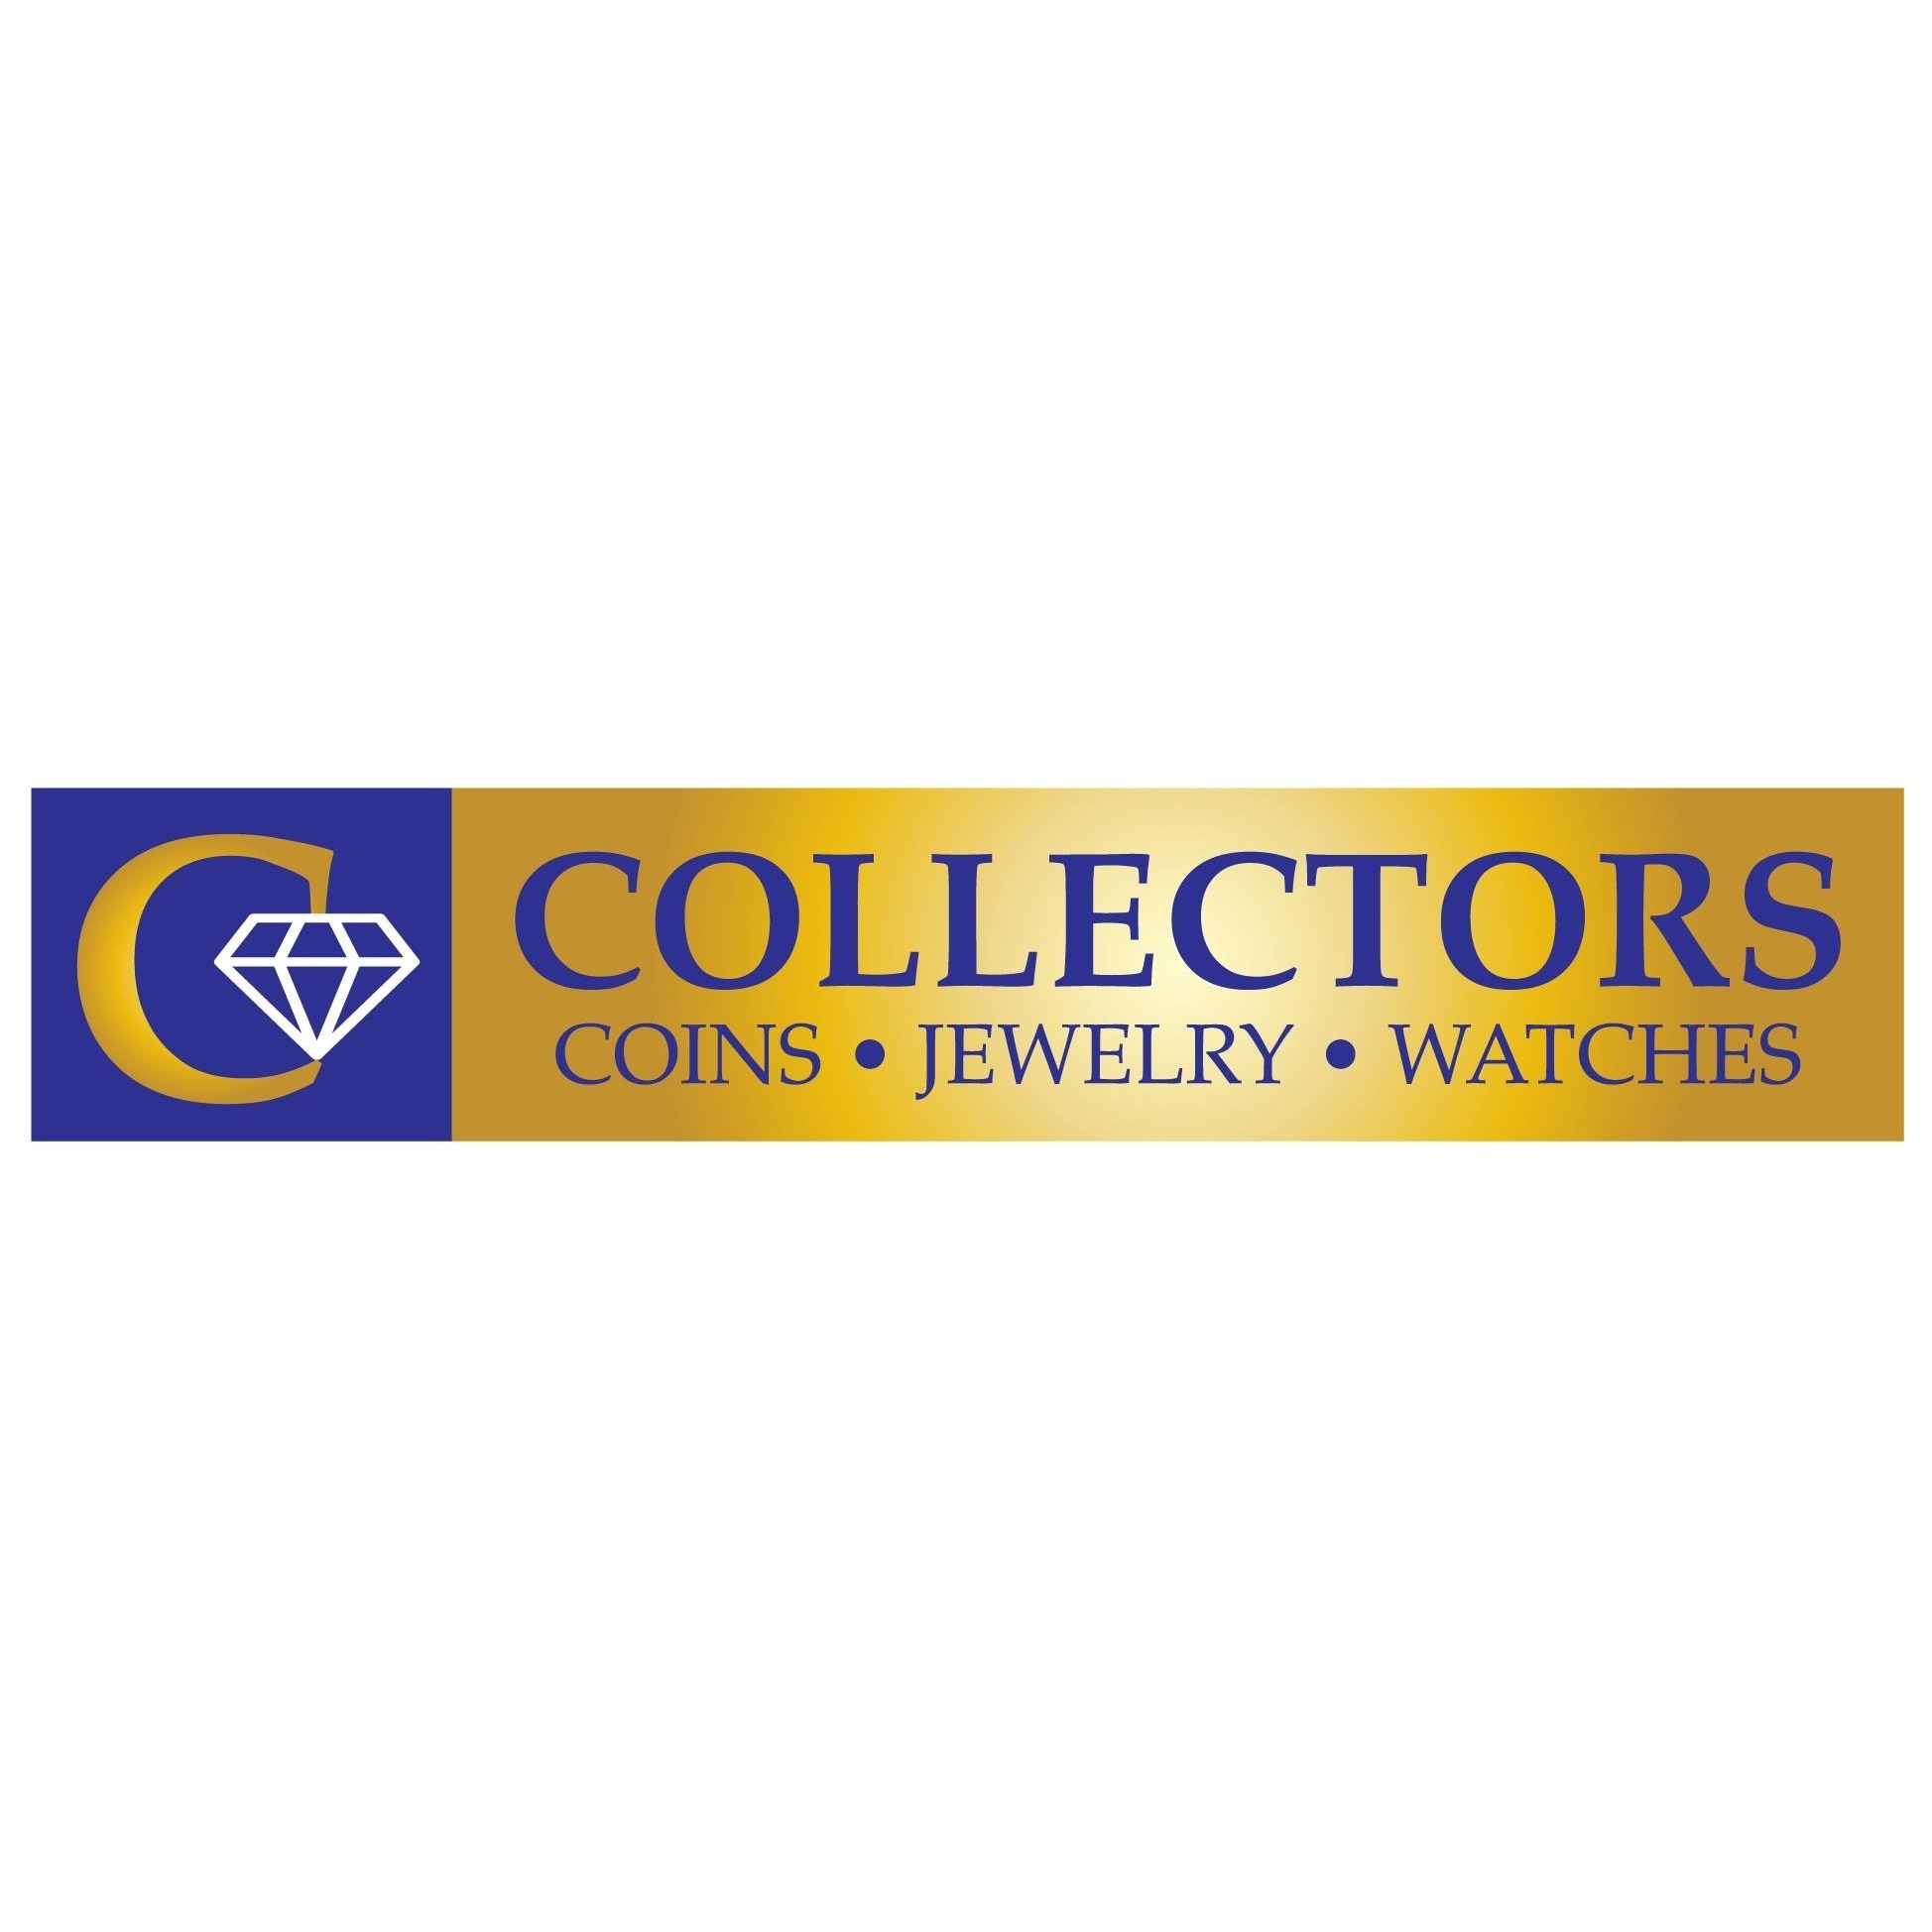 Collectors Coins Jewelry Gold & Watches - Old Bridge Township, NJ 08857 - (732)275-8005 | ShowMeLocal.com